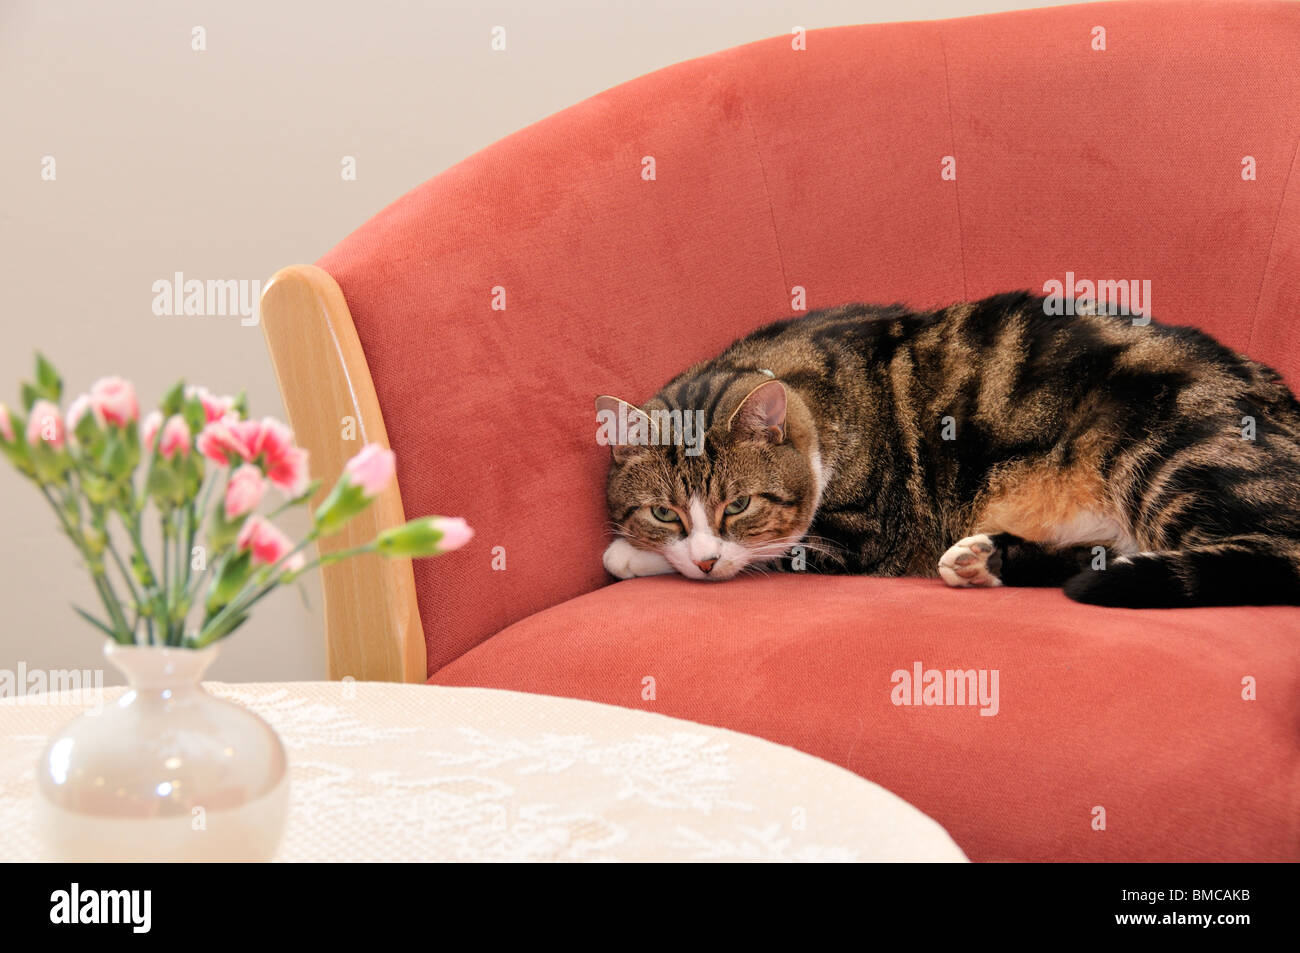 Sleepy cat in a comfortable chair with flowers in the foreground. Stock Photo